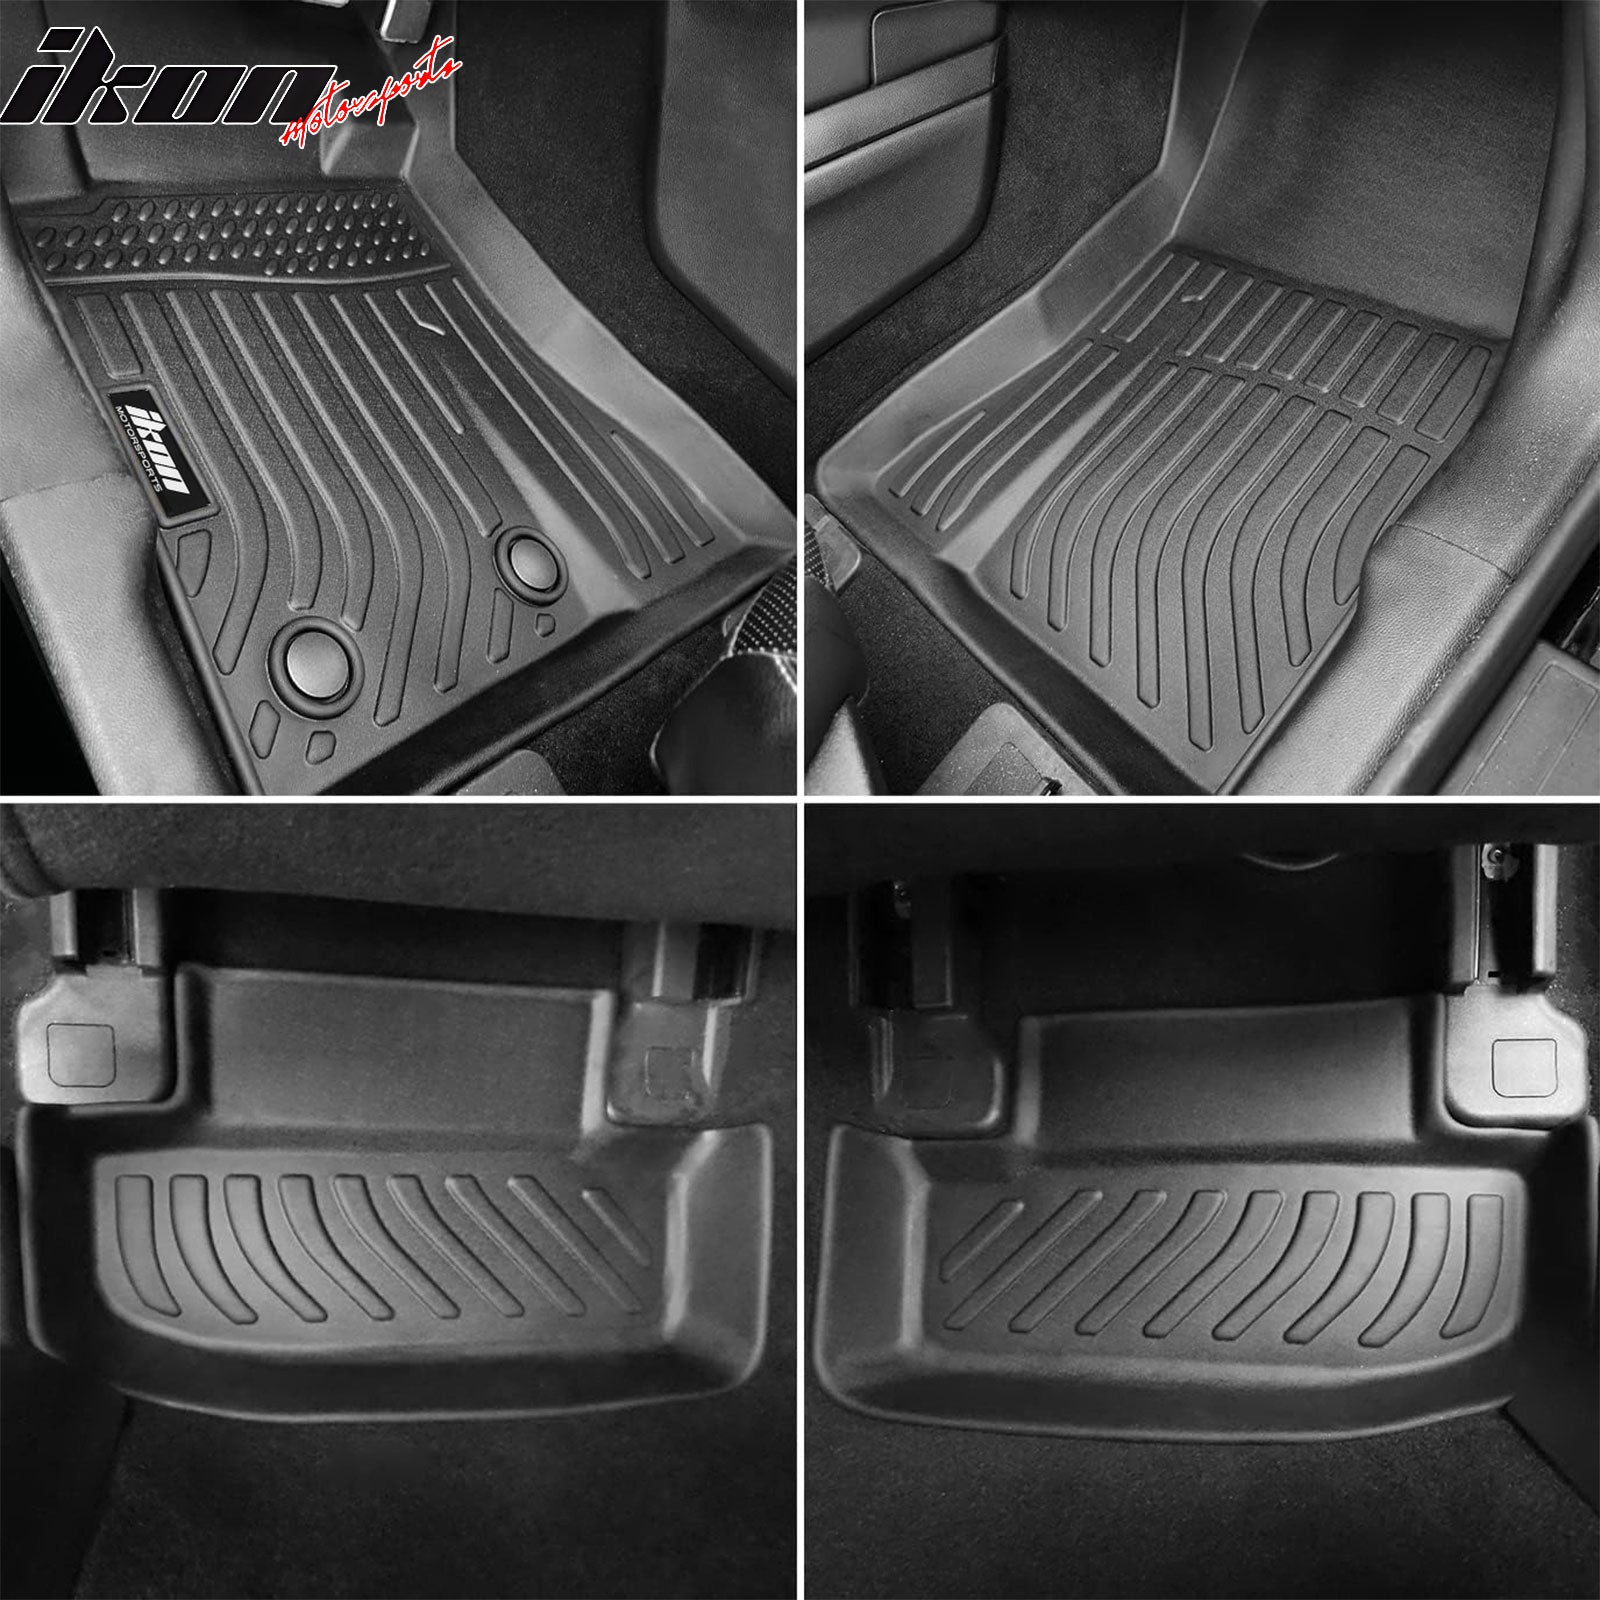 Fits 15-24 Ford Mustang 3D TPE Floor Mat All Weather Heavy Duty Carpets Liner